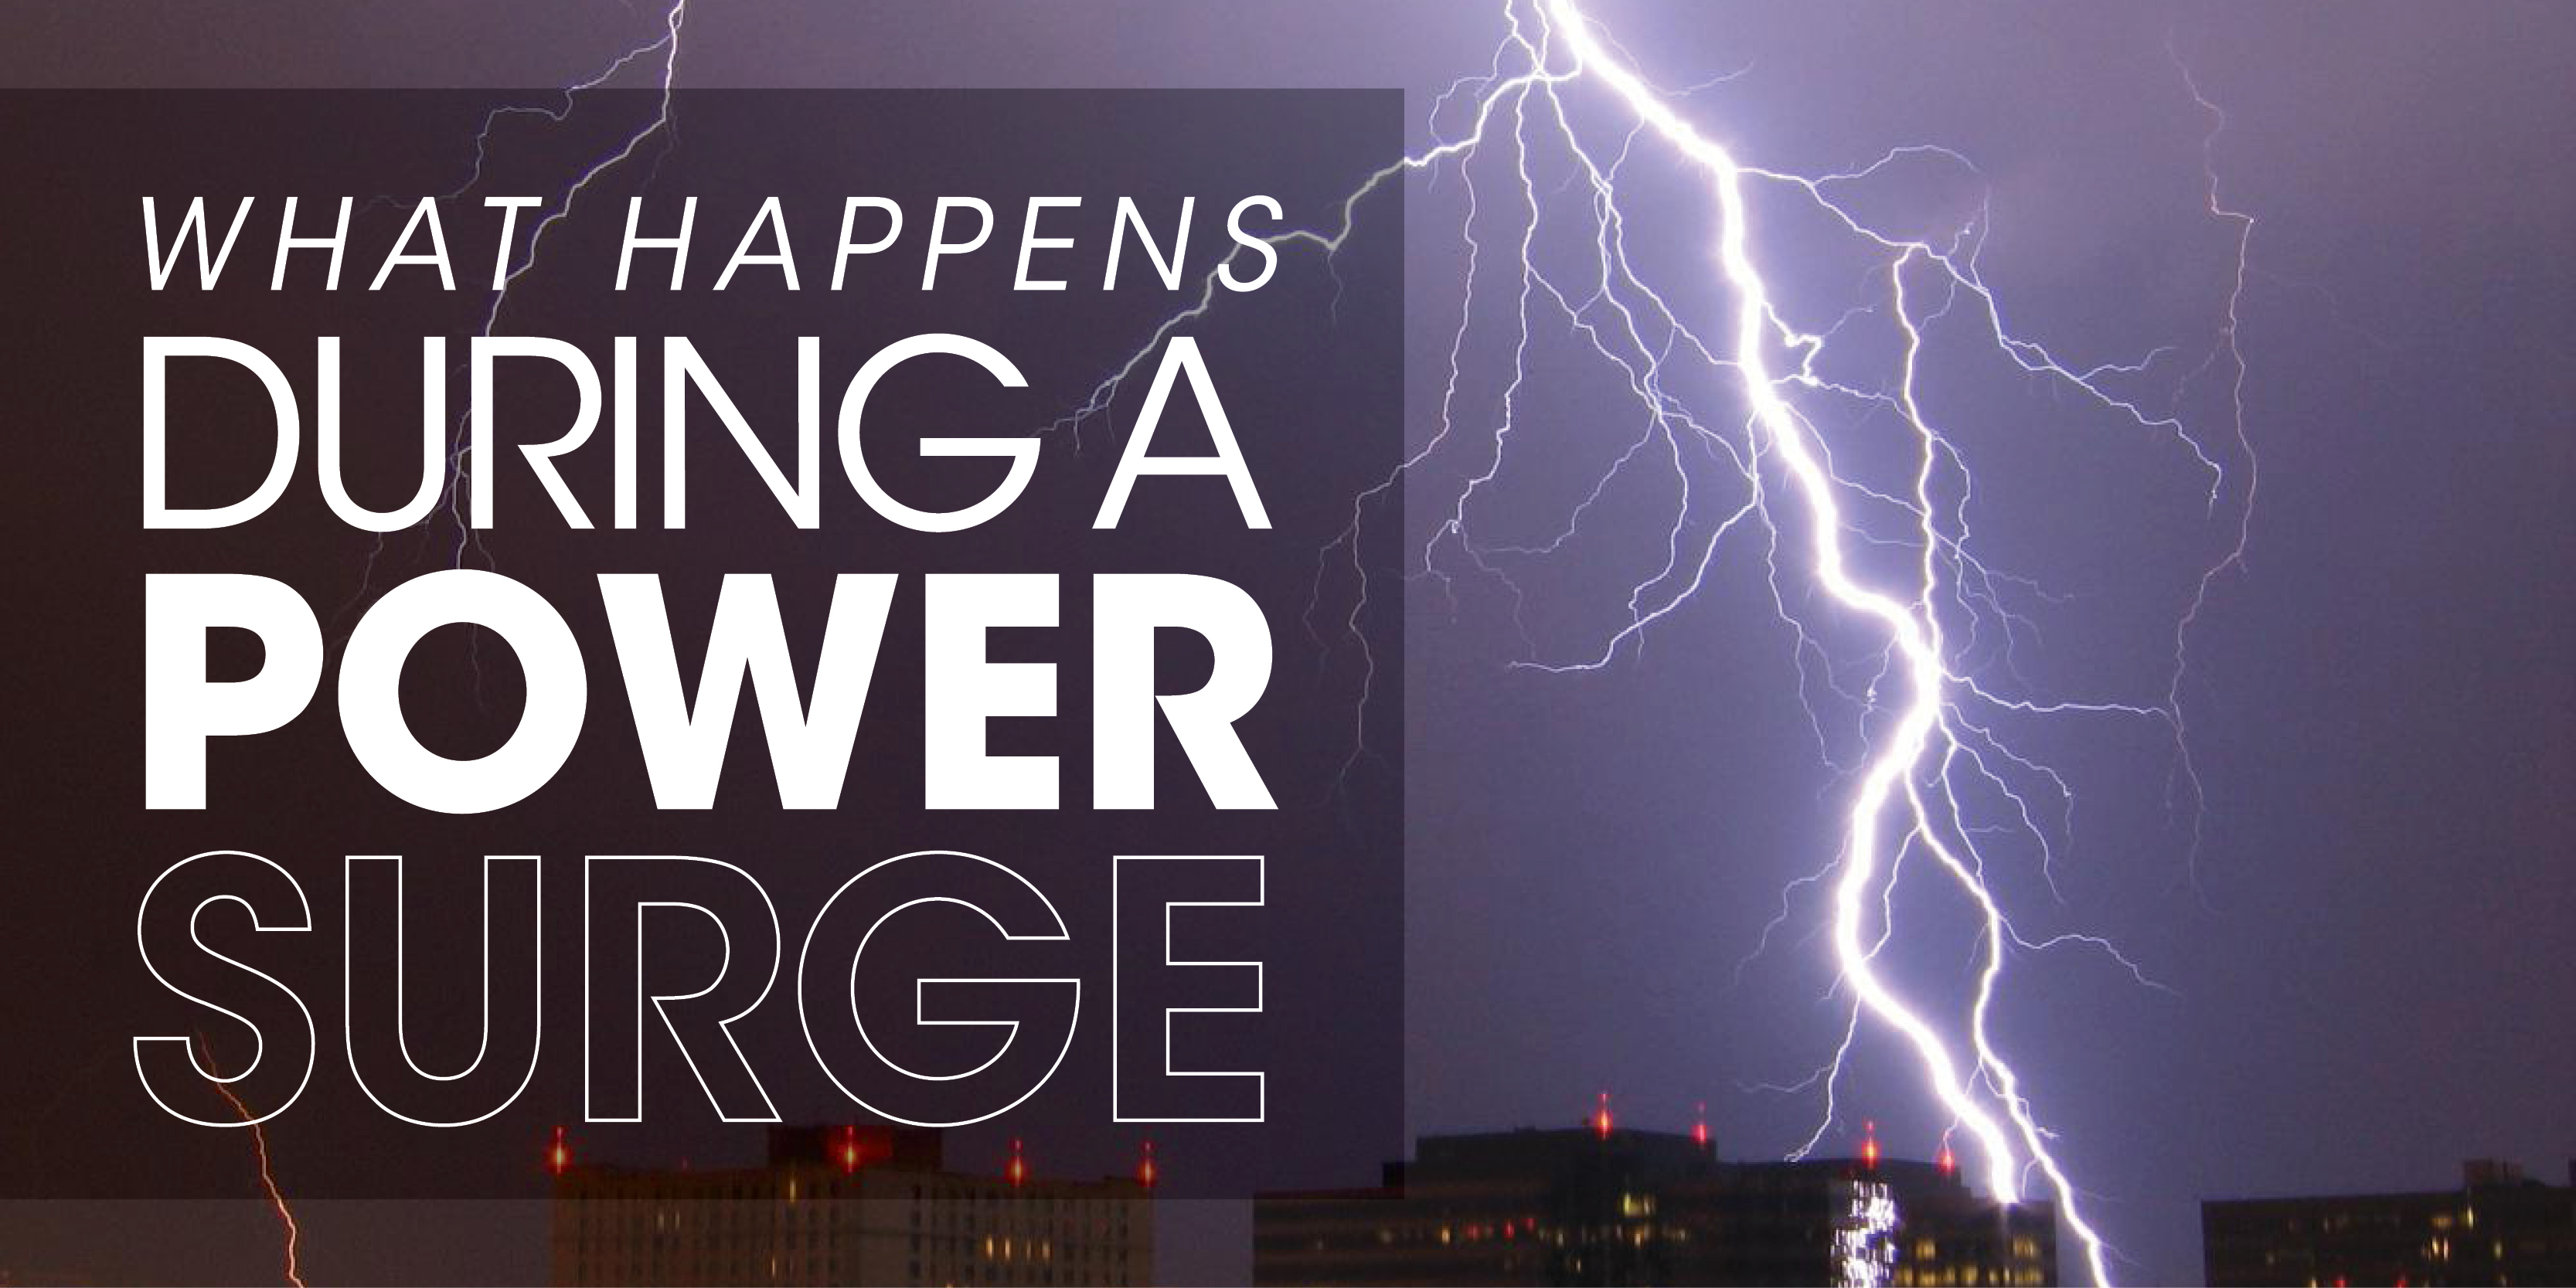 Lightning at night with text: "what happens during a power serge"